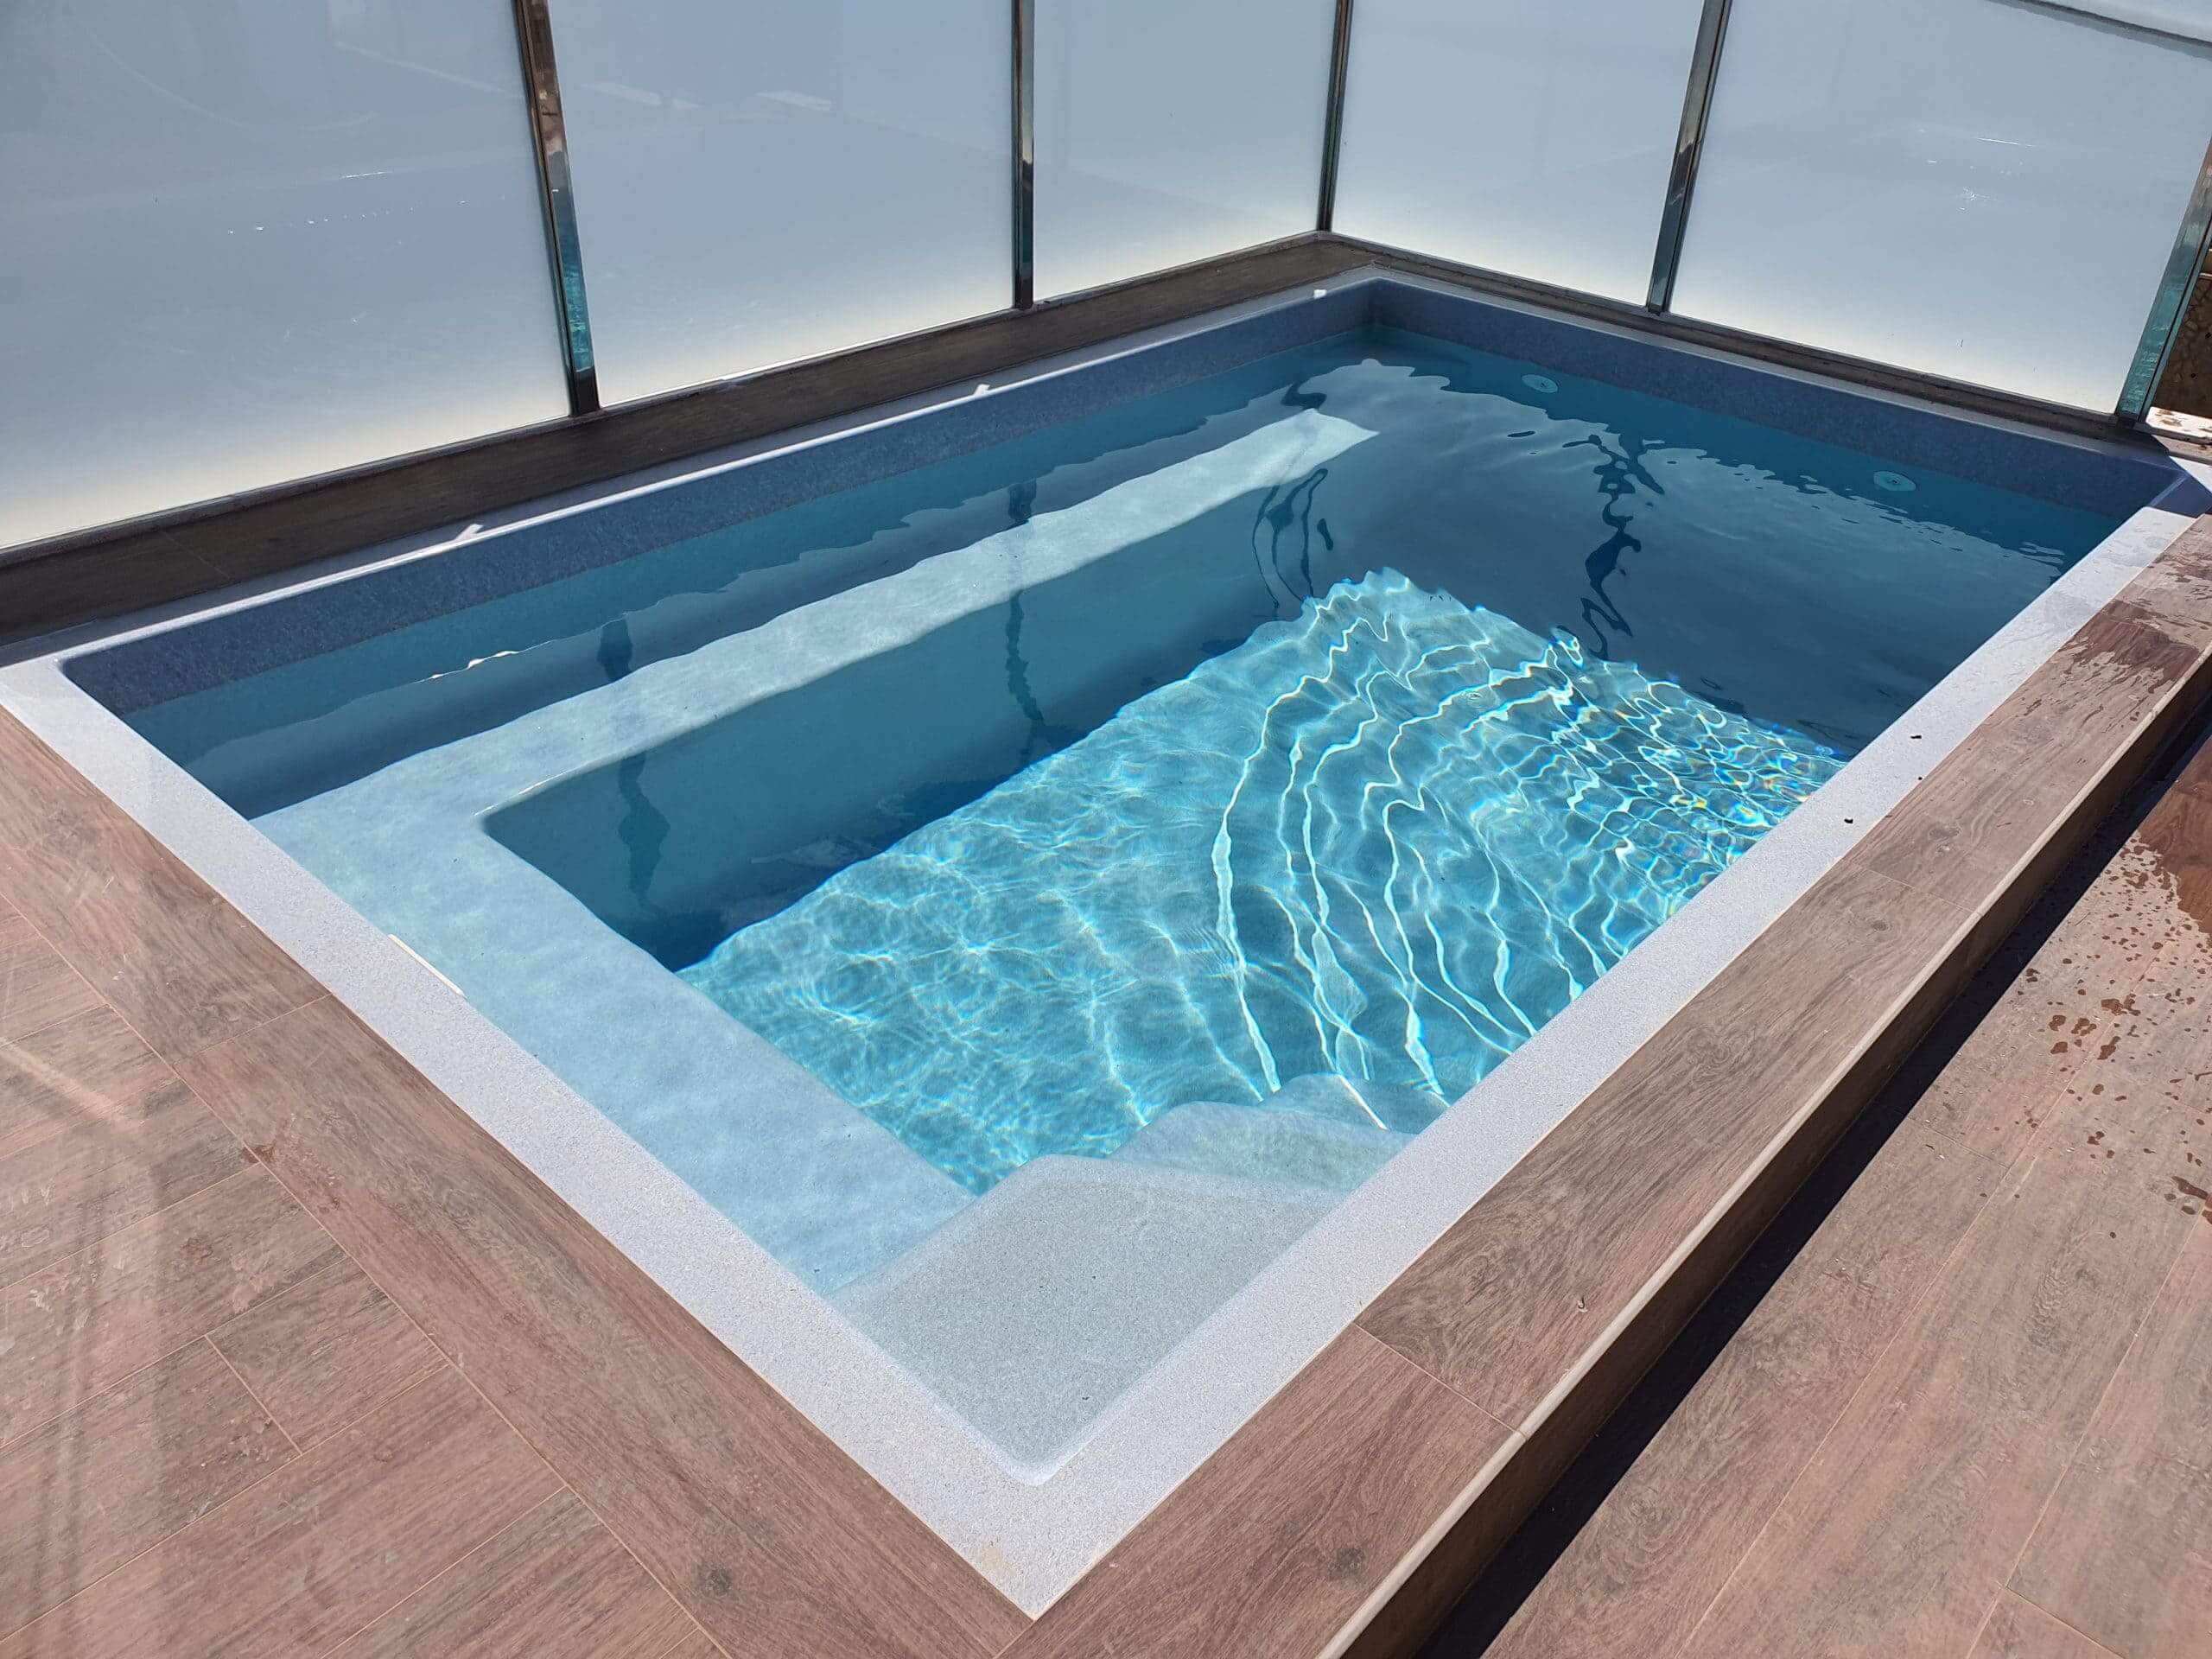 4x2 fibreglass or polyester pools